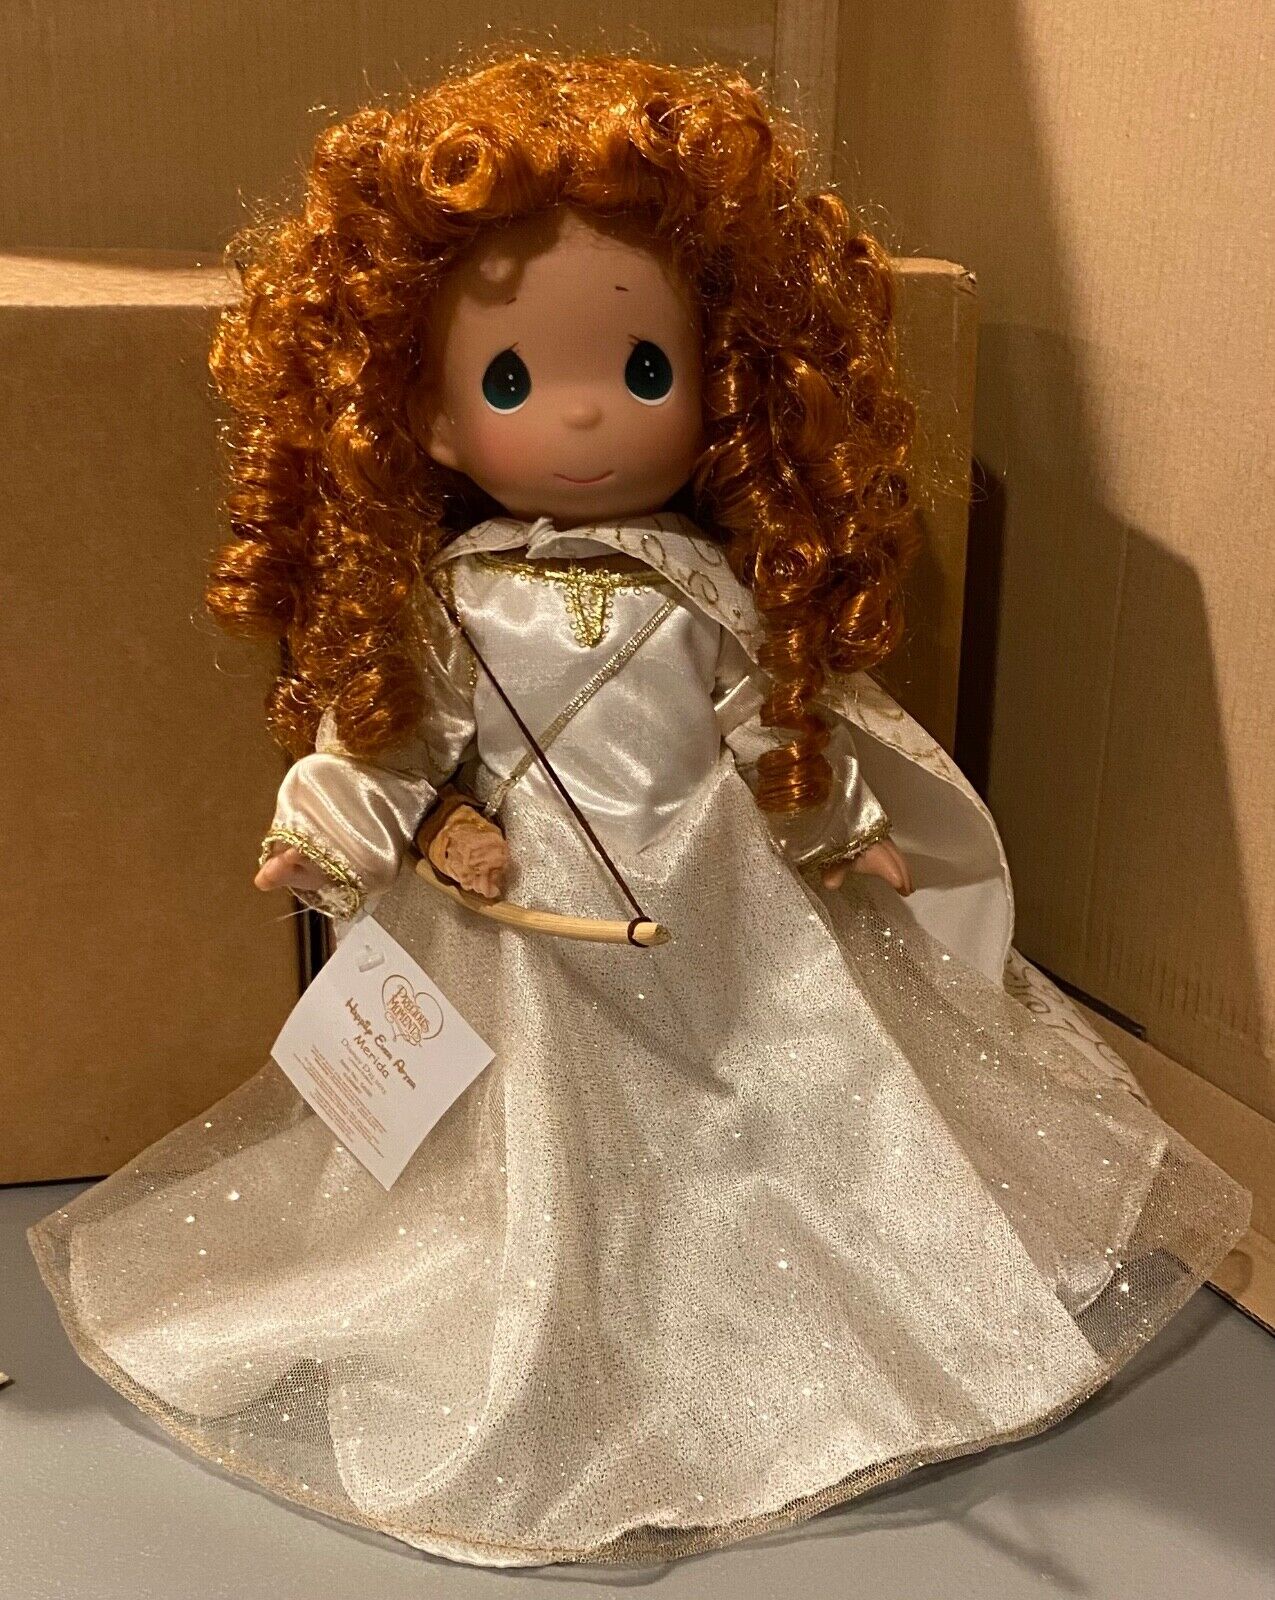 SIGNED & INSCRIBED DISNEY D23 2015 PRECIOUS MOMENTS MERIDA LIMITED EDITION DOLL